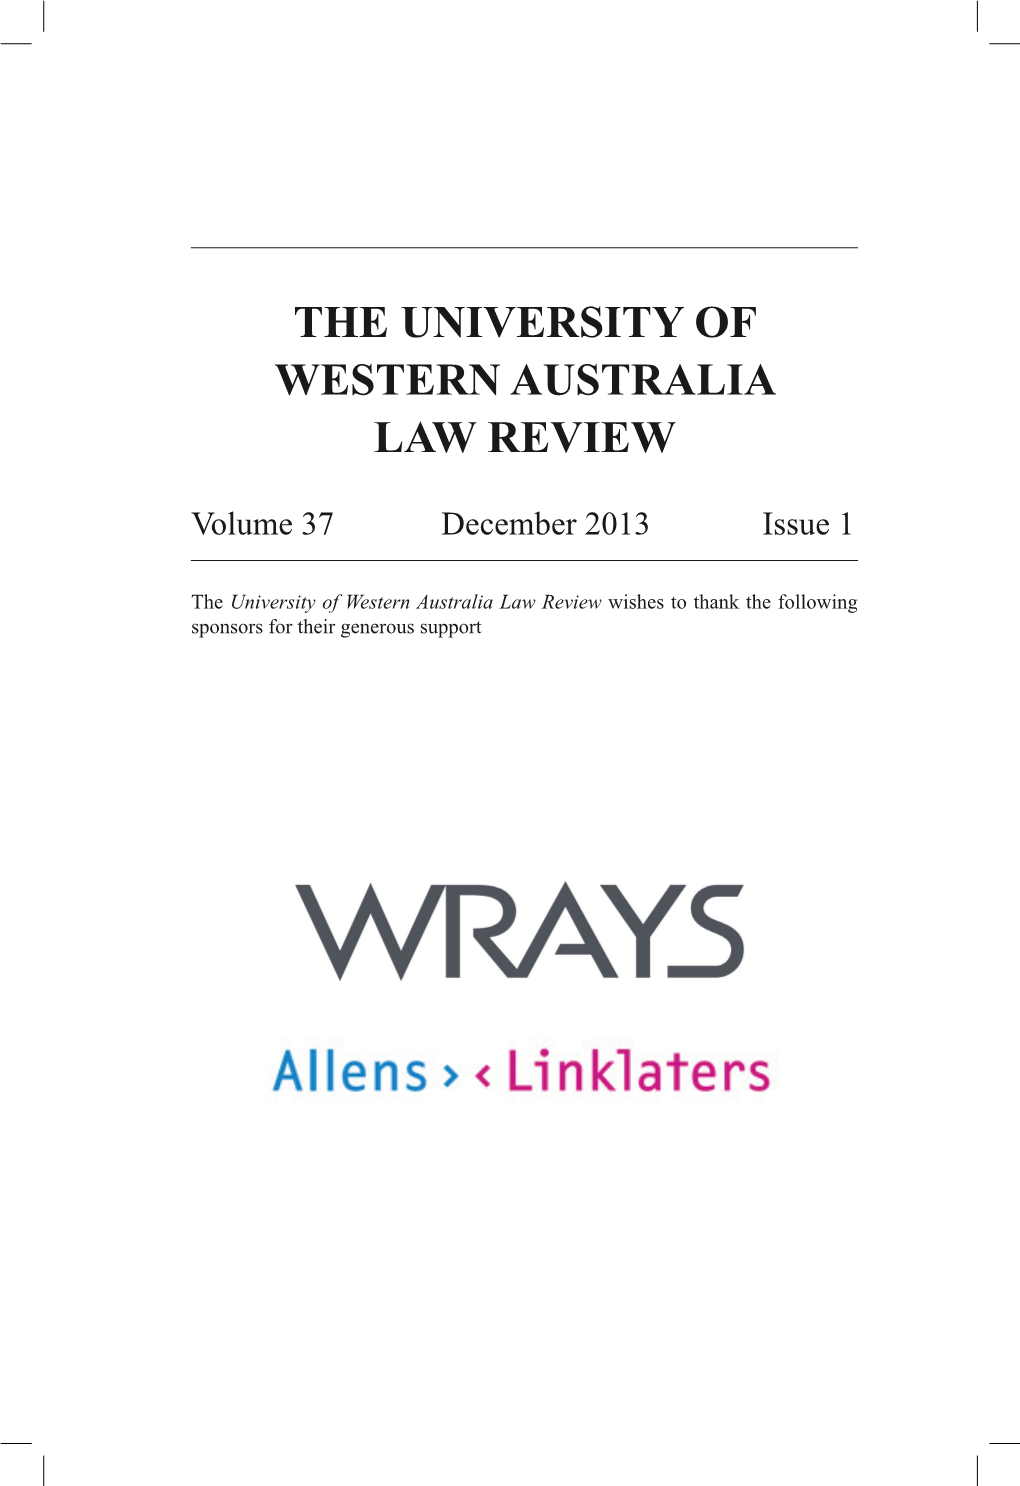 The University of Western Australia Law Review